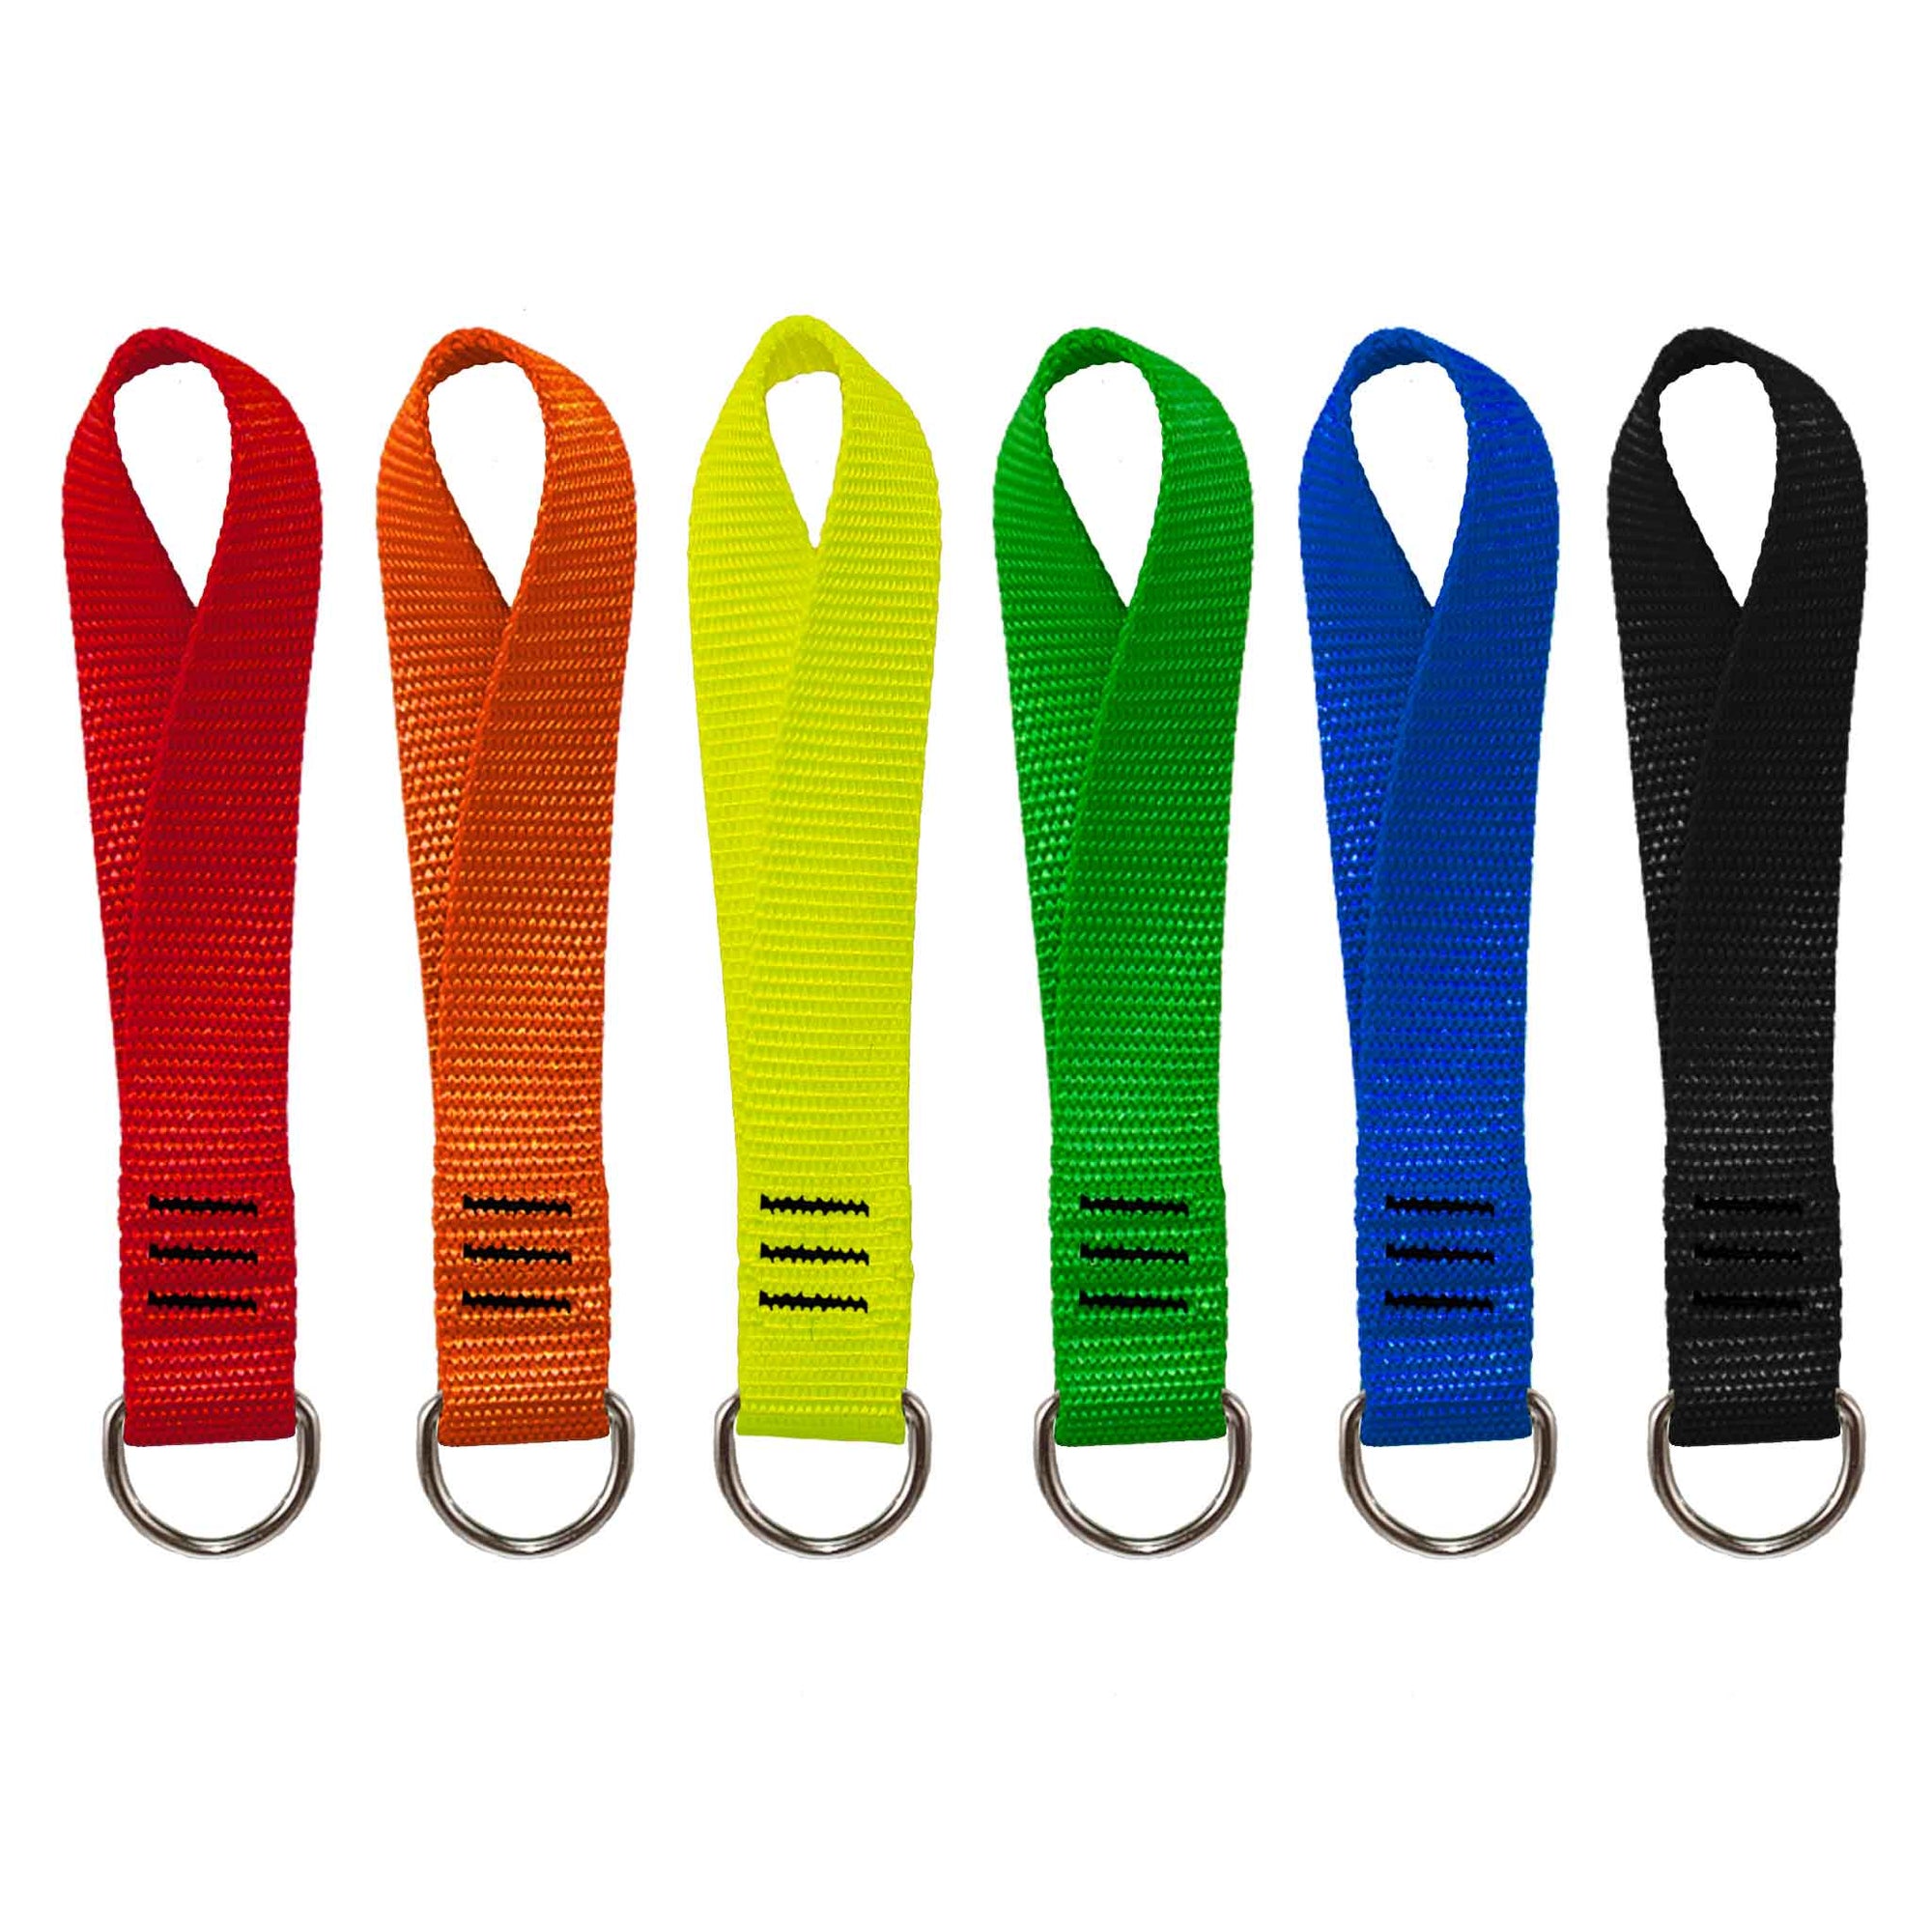 All 6 colors of ring loops